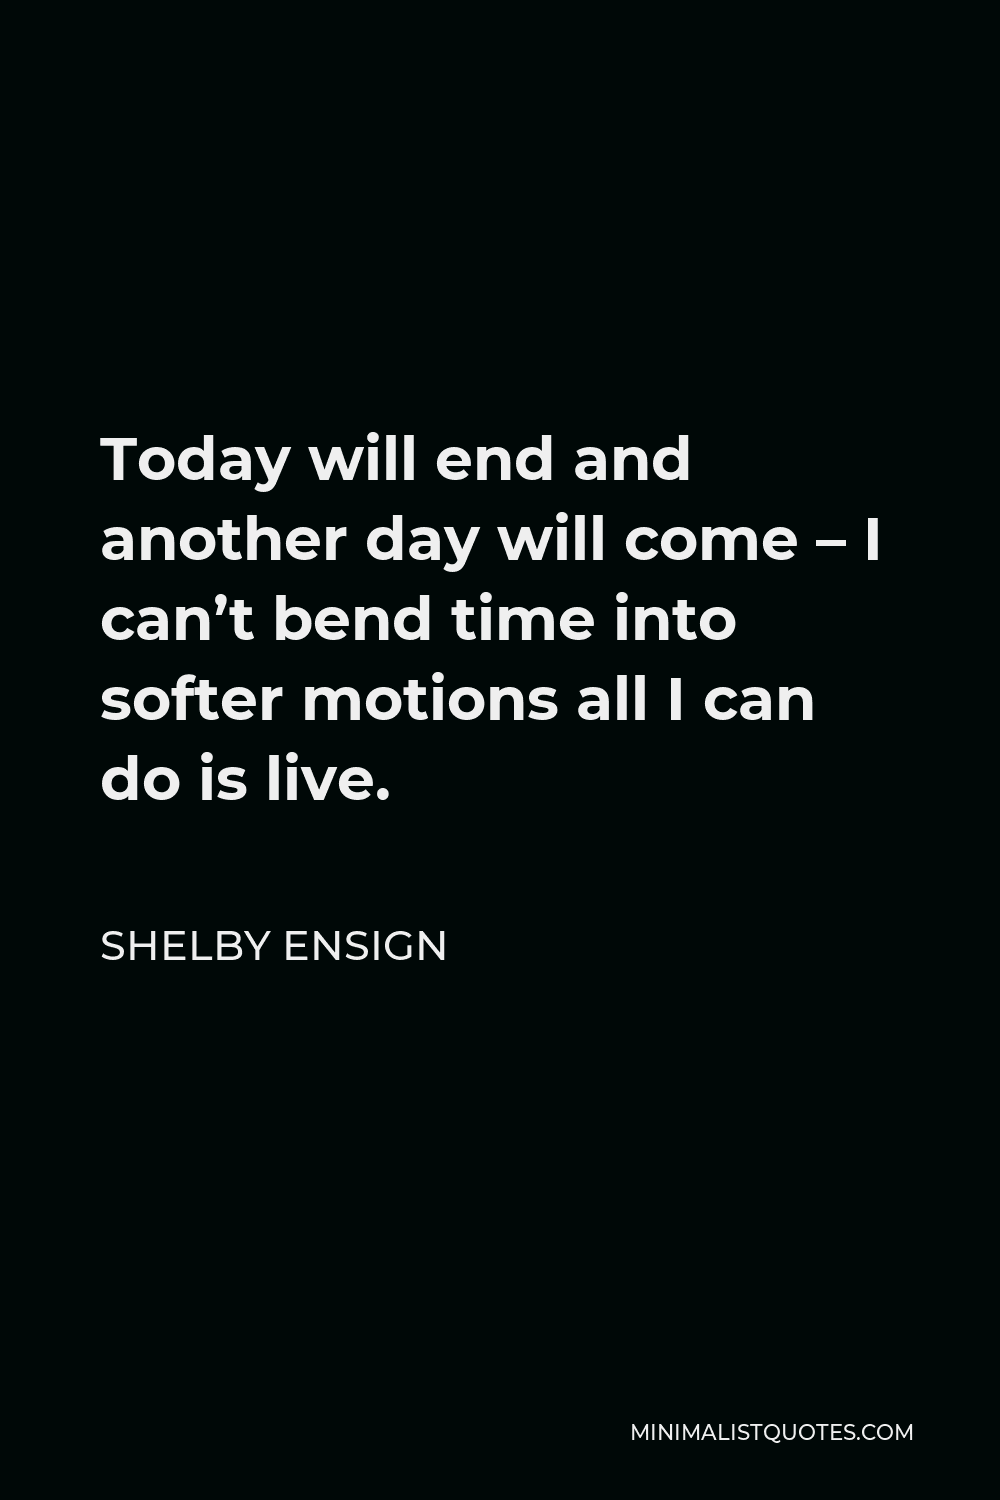 Shelby Ensign Quote - Today will end and another day will come – I can’t bend time into softer motions all I can do is live.